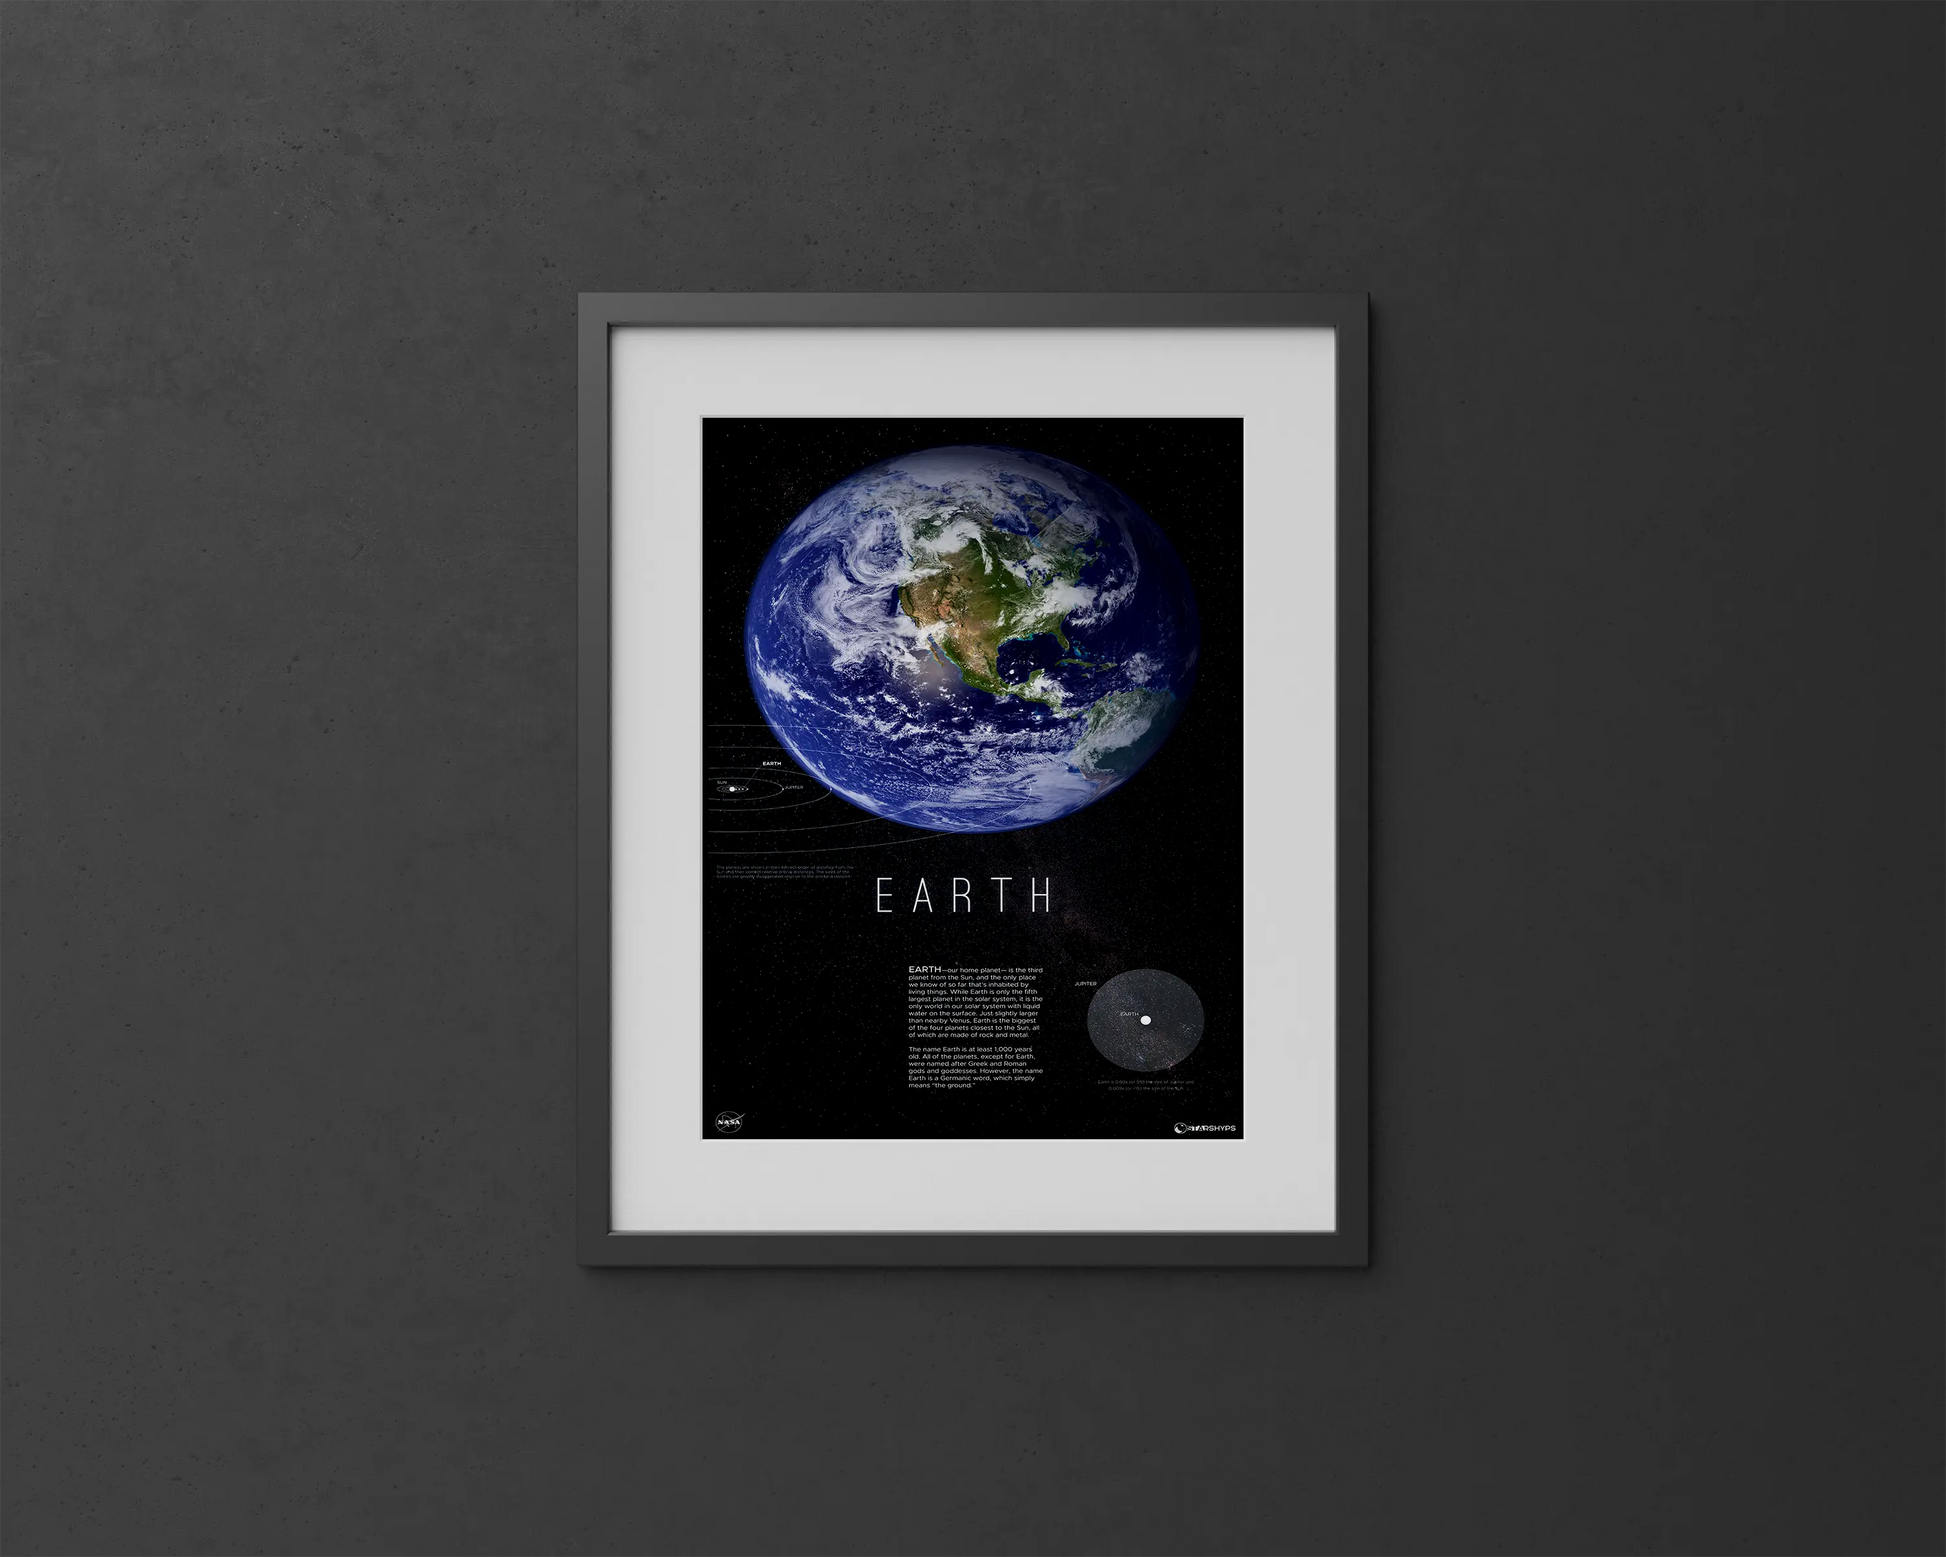 Blue Marble Earth Decor | Blue Earth Print | Rocket Blueprint Posters | An image of Earth taken from space, highlighting the North American continent. The planet is set against the black backdrop of space, with the Milky Way visible. The word "EARTH" is written below the image. Informational text explains that Earth is the third planet from the Sun, the only known planet with life, and provides details about its size and the etymology of its name.